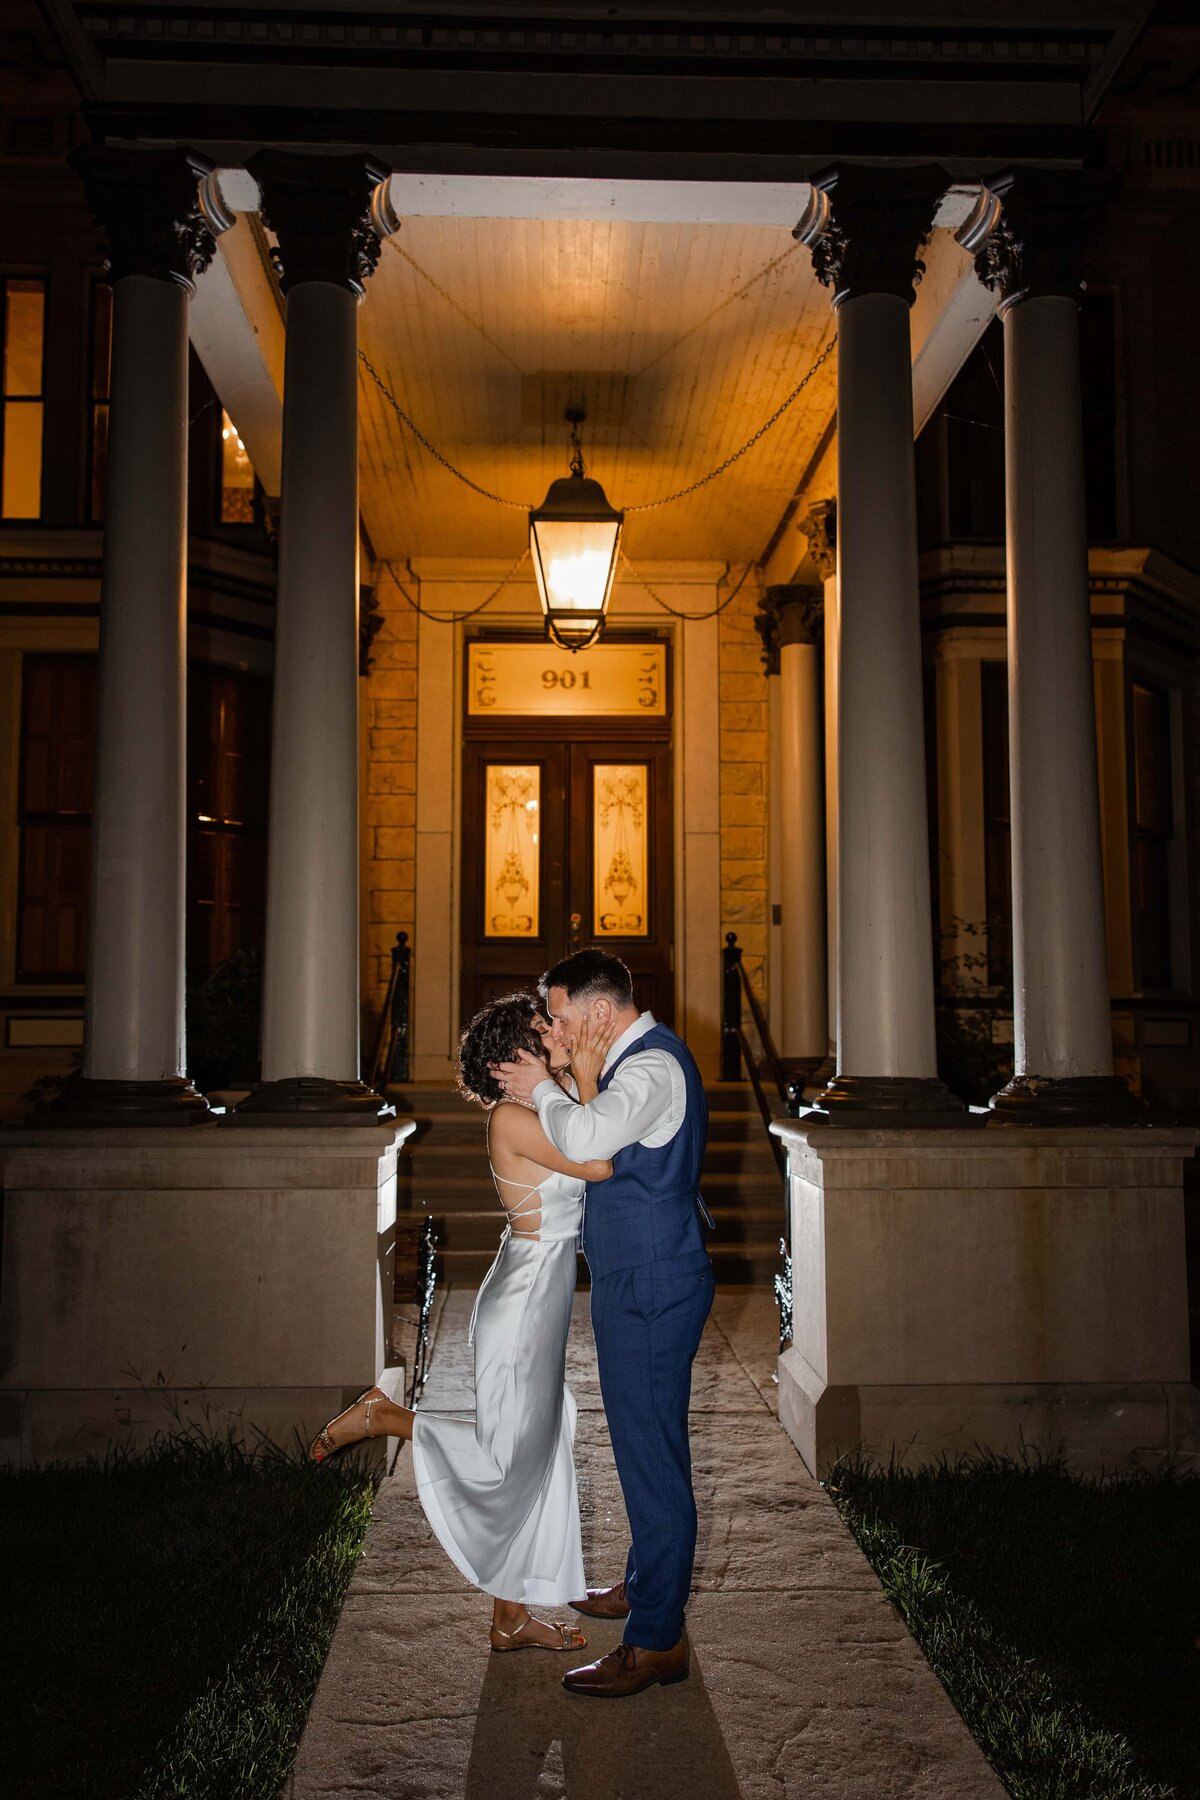 A couple embraces and kisses under a lantern at the entrance of a building with columns at night during their Iowa wedding.